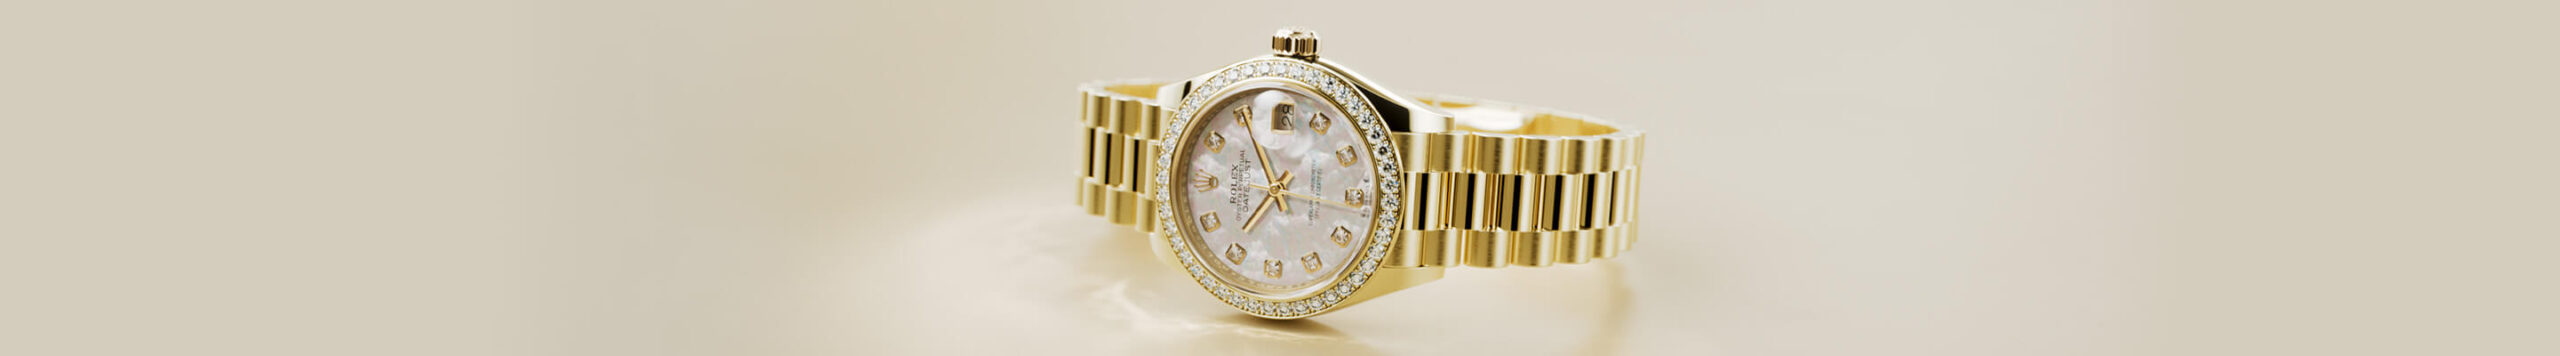 Gold wristwatch with a diamond-studded bezel and white dial, displayed on a beige background.